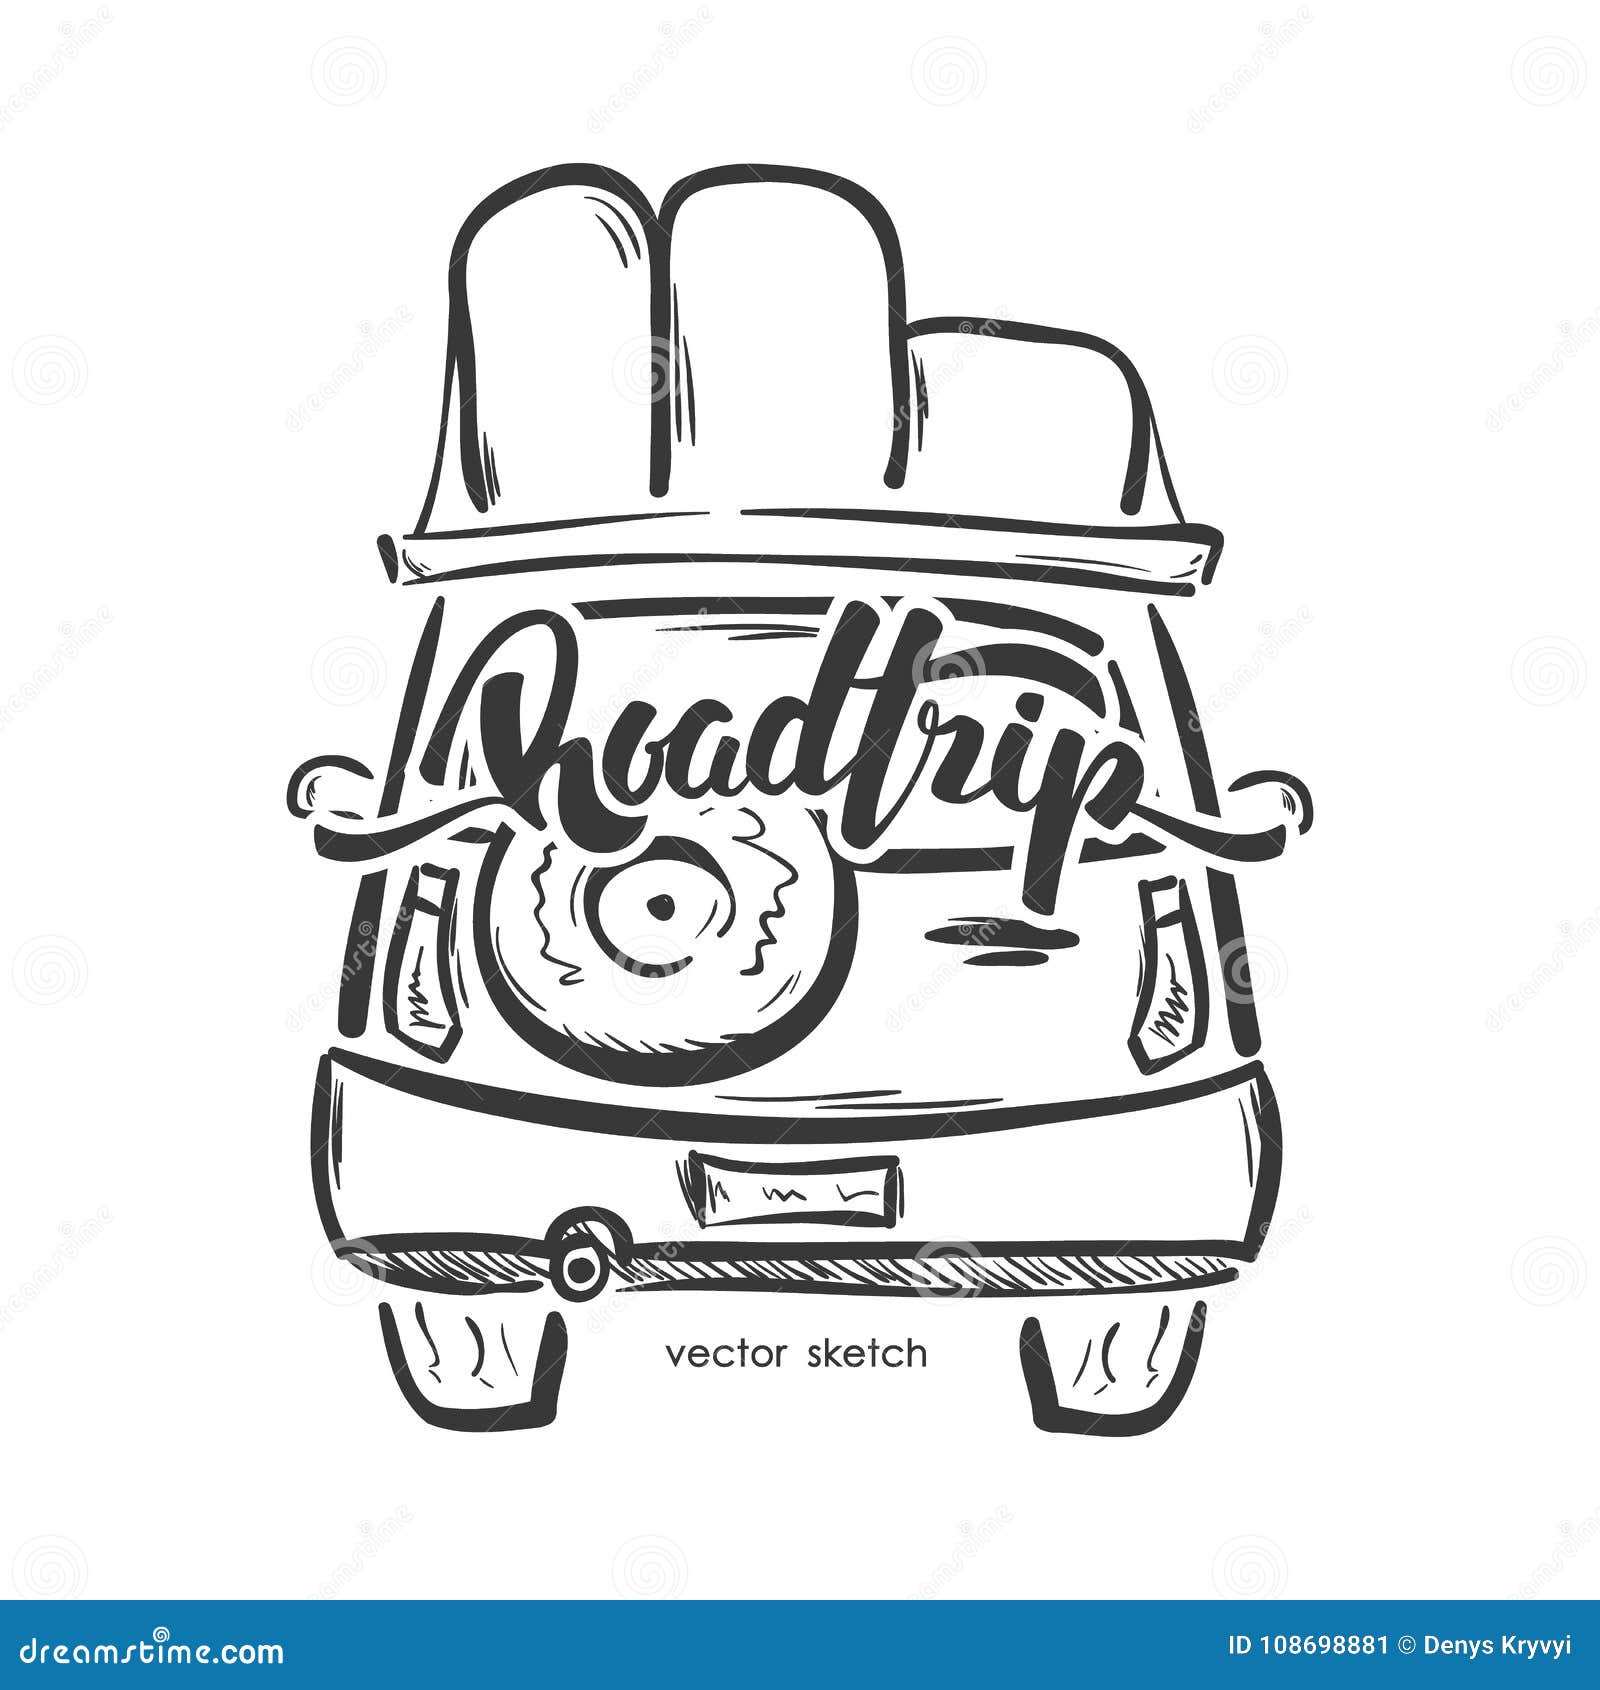 Vector Illustration: Hand Drawn Emblem with Travel Car and Handwritten  Lettering of Road Trip. Sketch Line Design Stock Vector - Illustration of  drawing, icon: 108698881